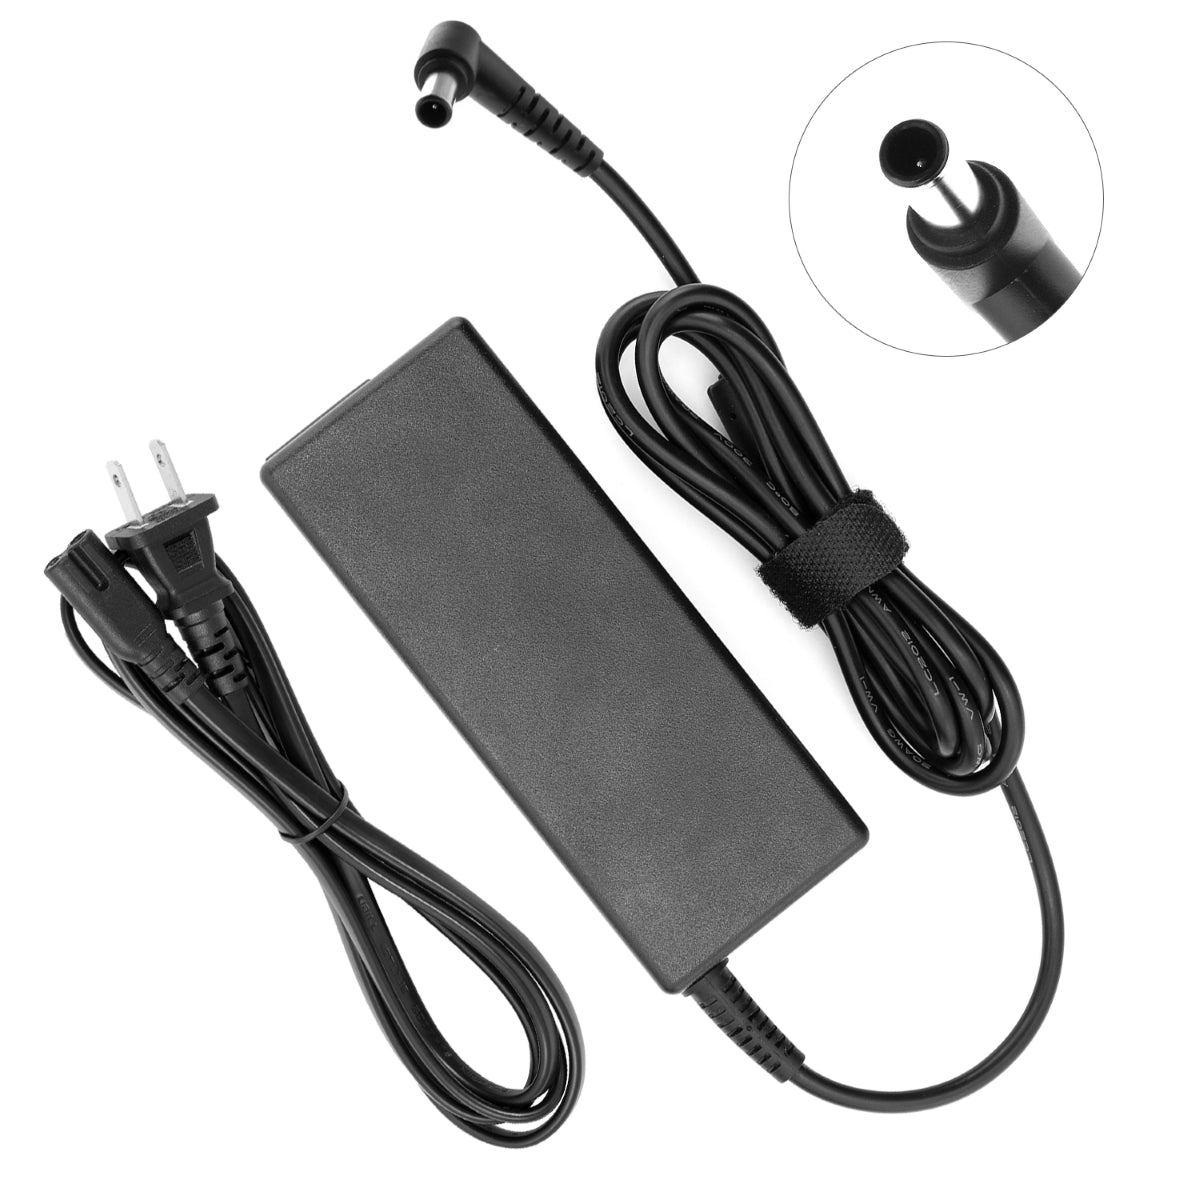 AC Adapter Power Supply for Samsung LC27F591FDNXZA LED Monitor Display